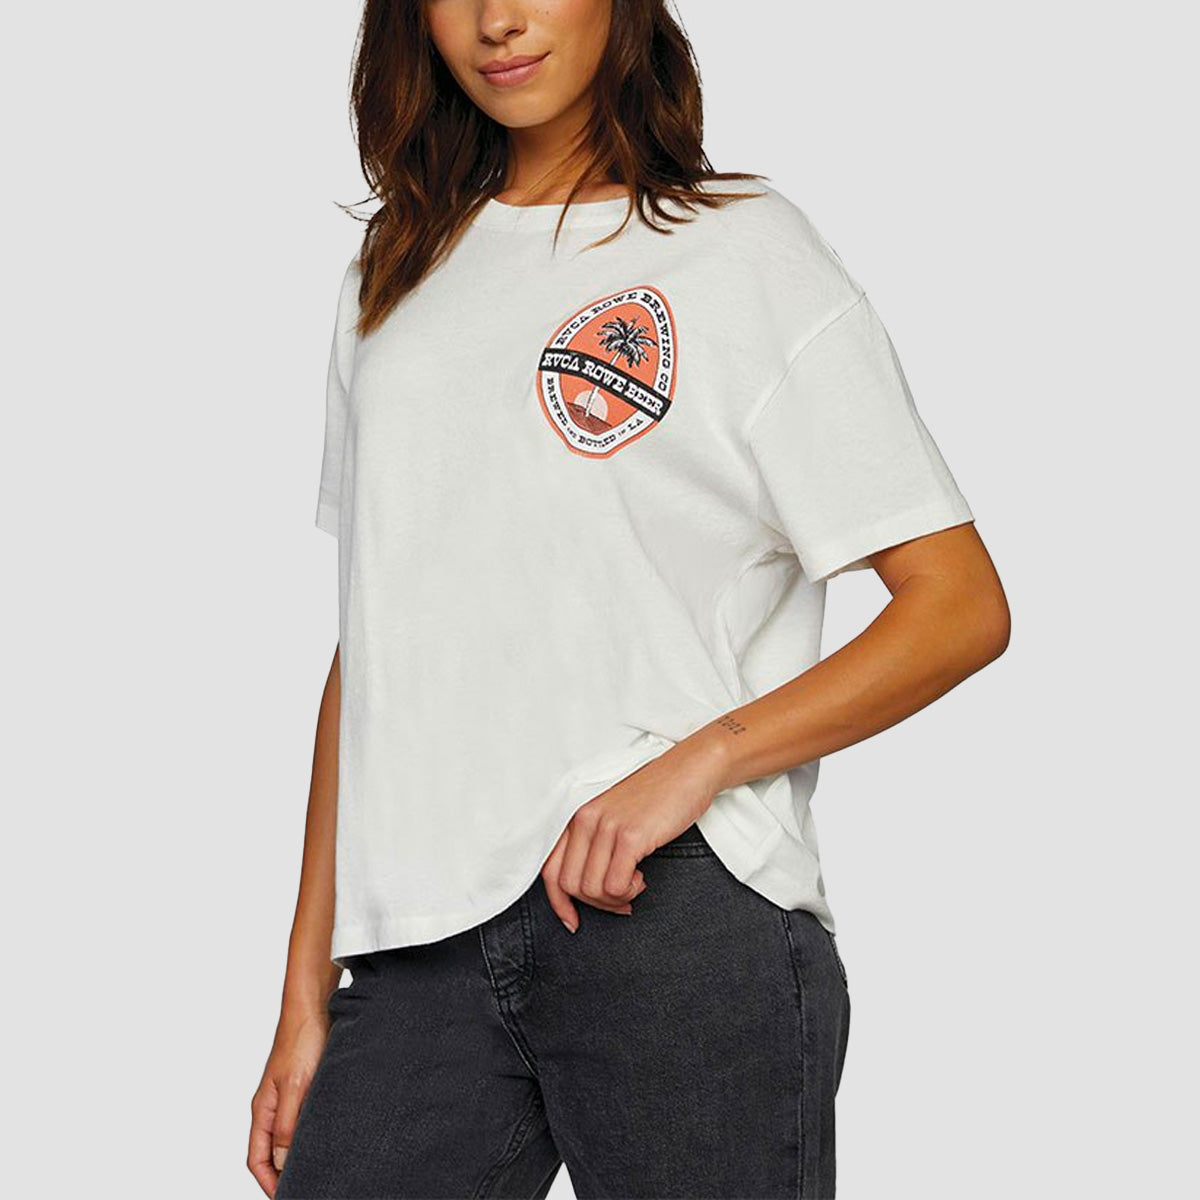 RVCA Camille Rowe Brewing T-Shirt Vintage White - Womens